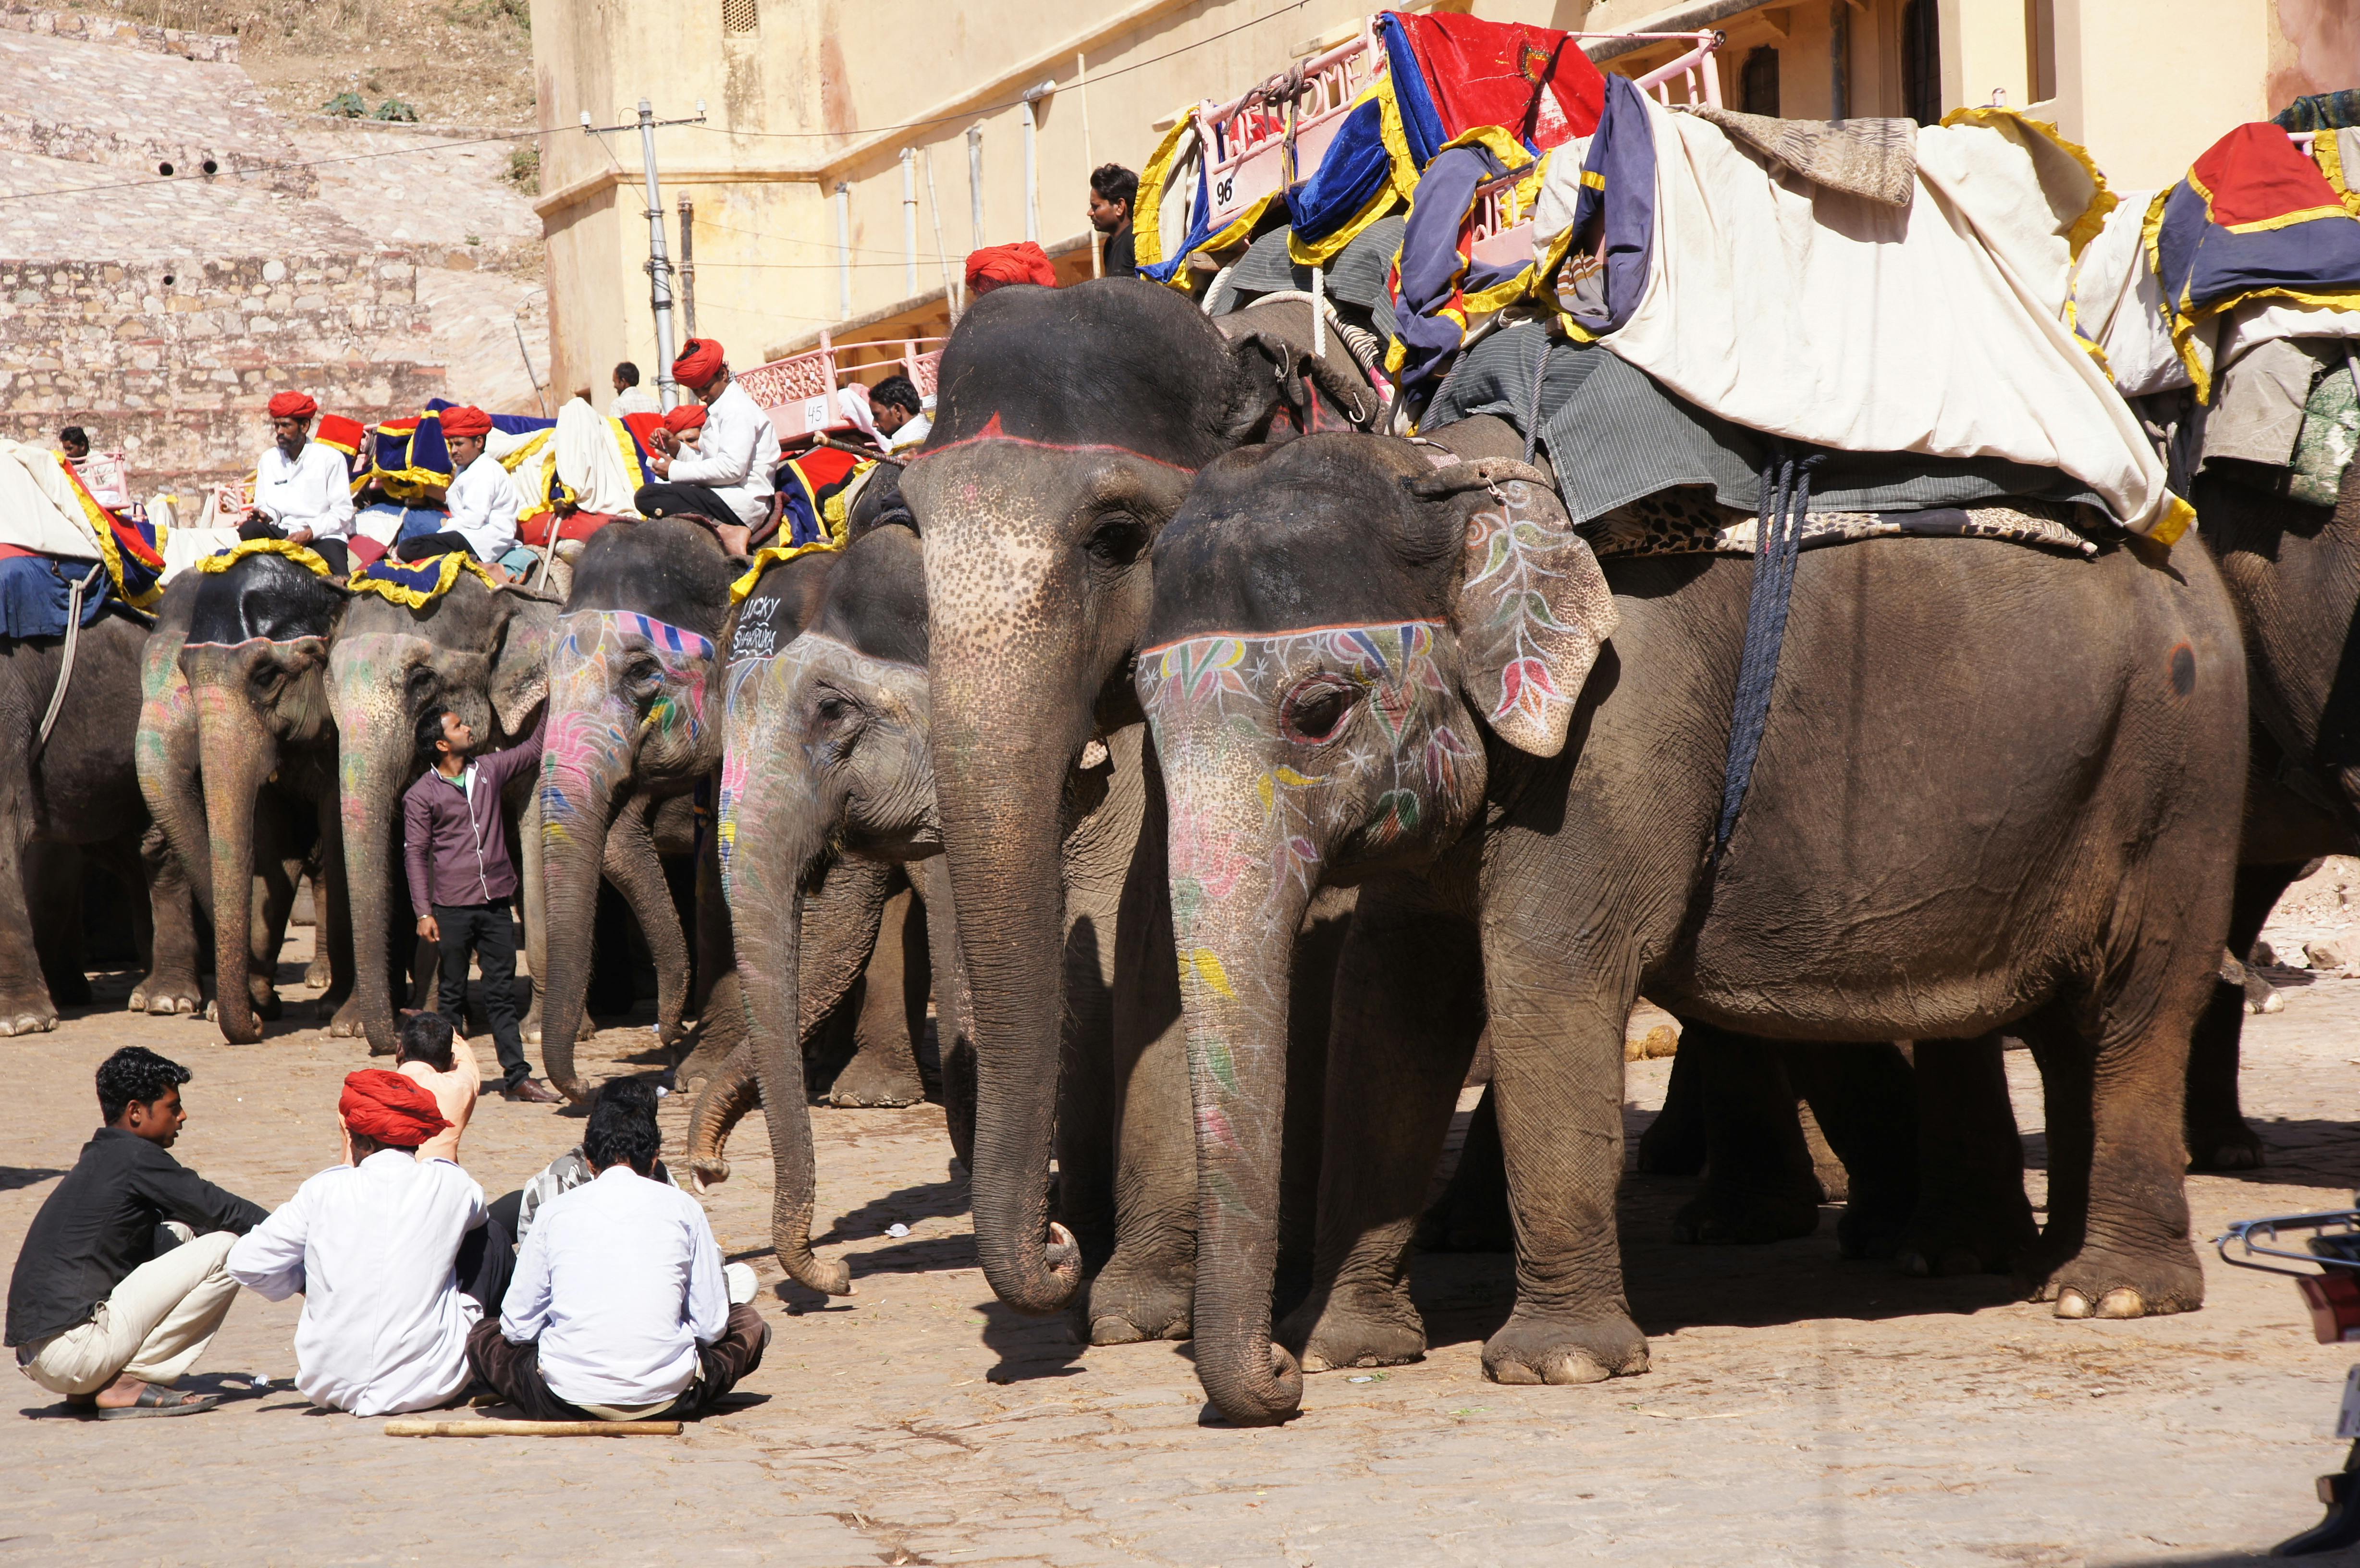 decoratively painted elephants waiting to carry tourists